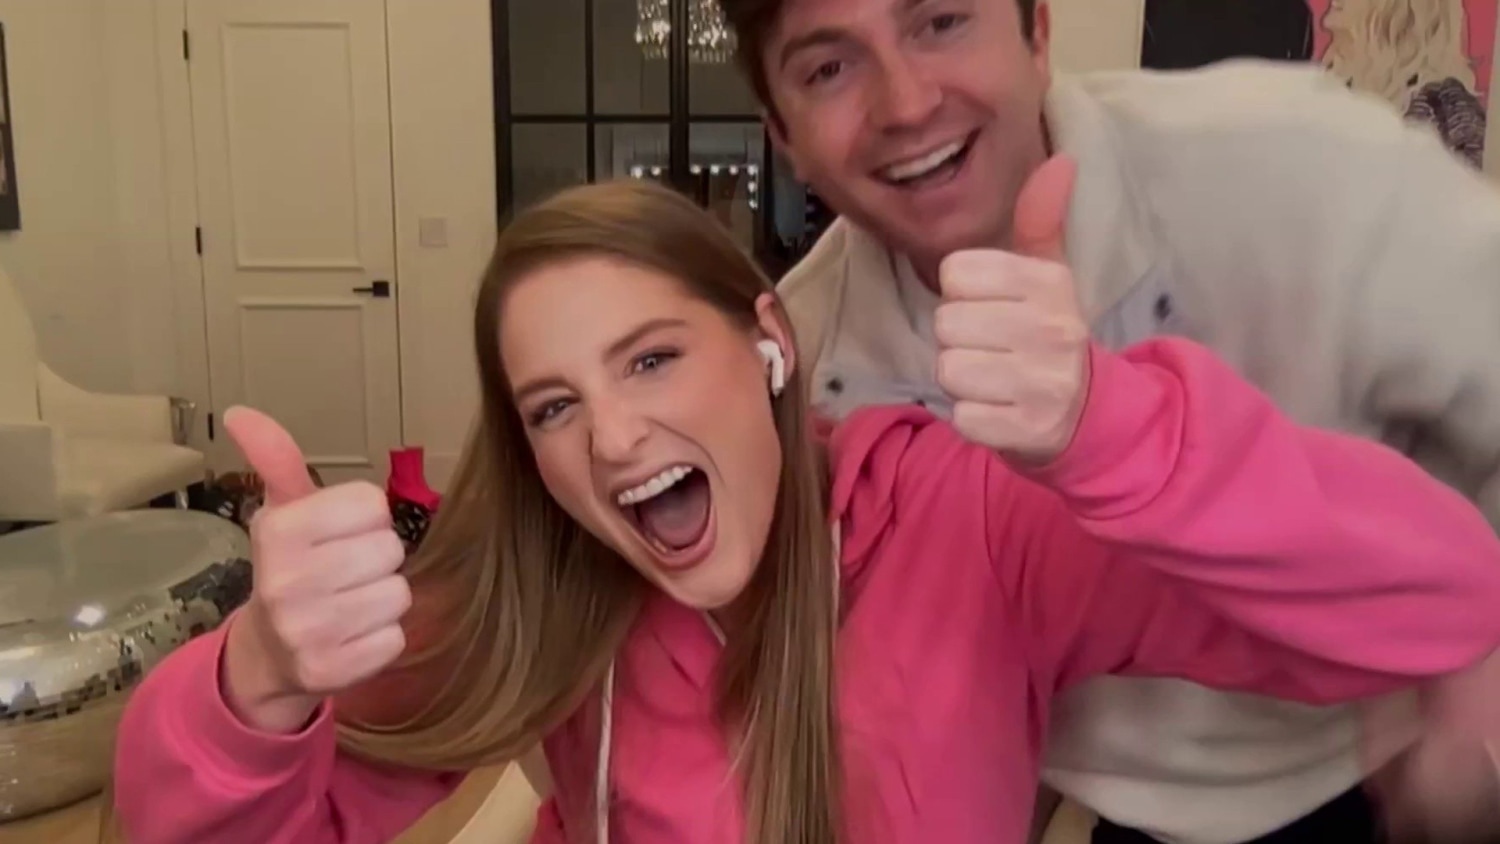 Meghan Trainor & Daryl Sabara Are Expecting Baby No 2, She Announces  Pregnancy Book Too!, books, Celebrity Babies, Daryl Sabara, Expecting, Meghan  Trainor, Pregnant Celebrities